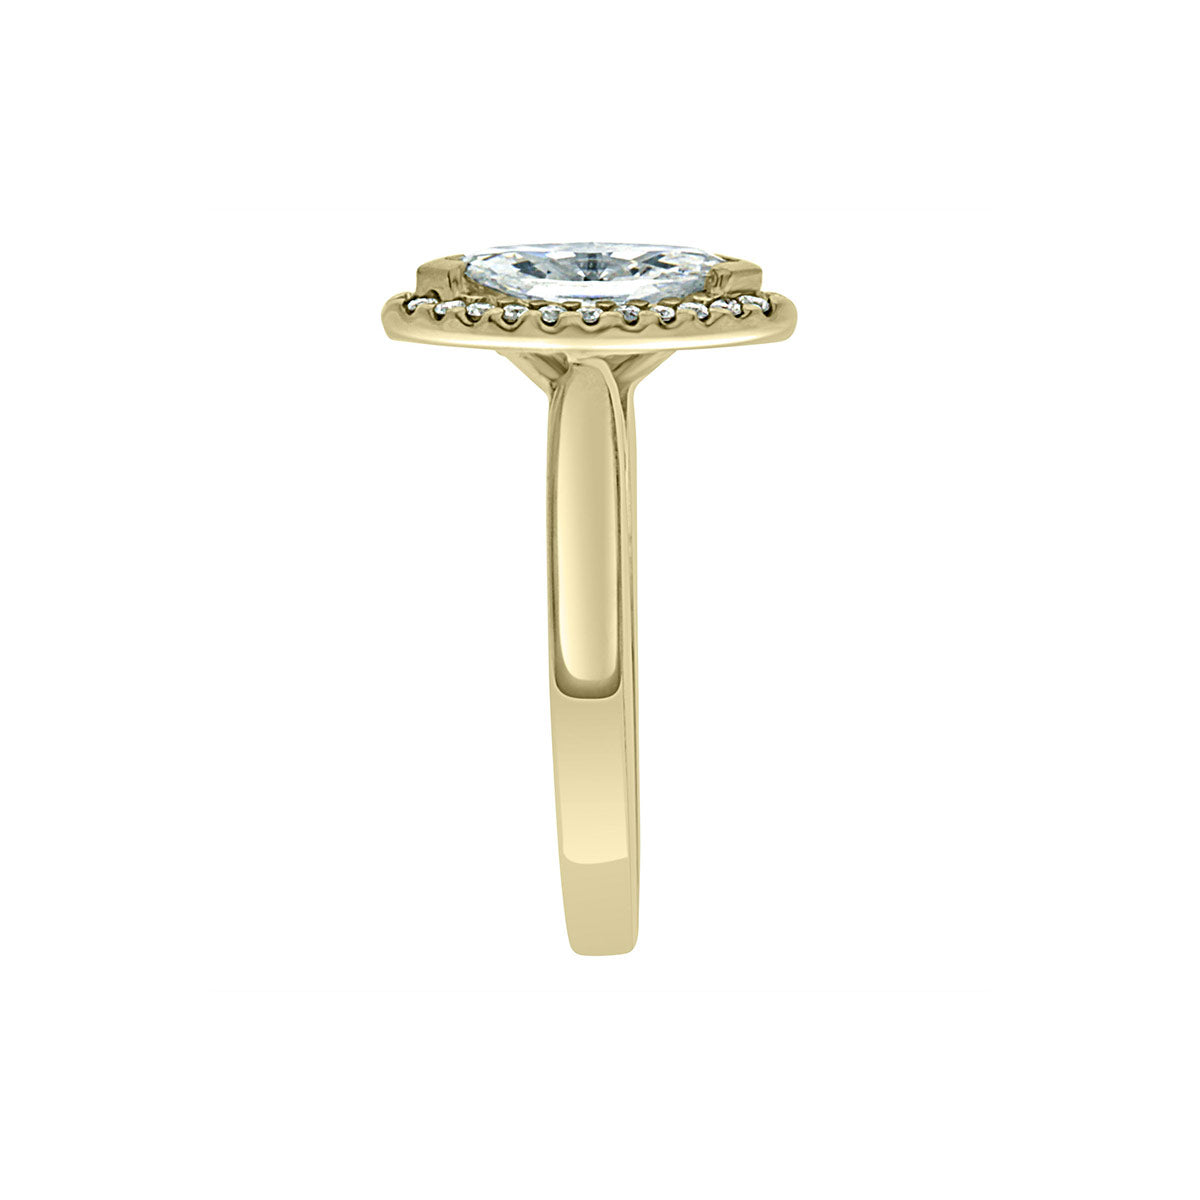 Marquise Cut Halo Ring in yellow gold in an upright position from a side angle view